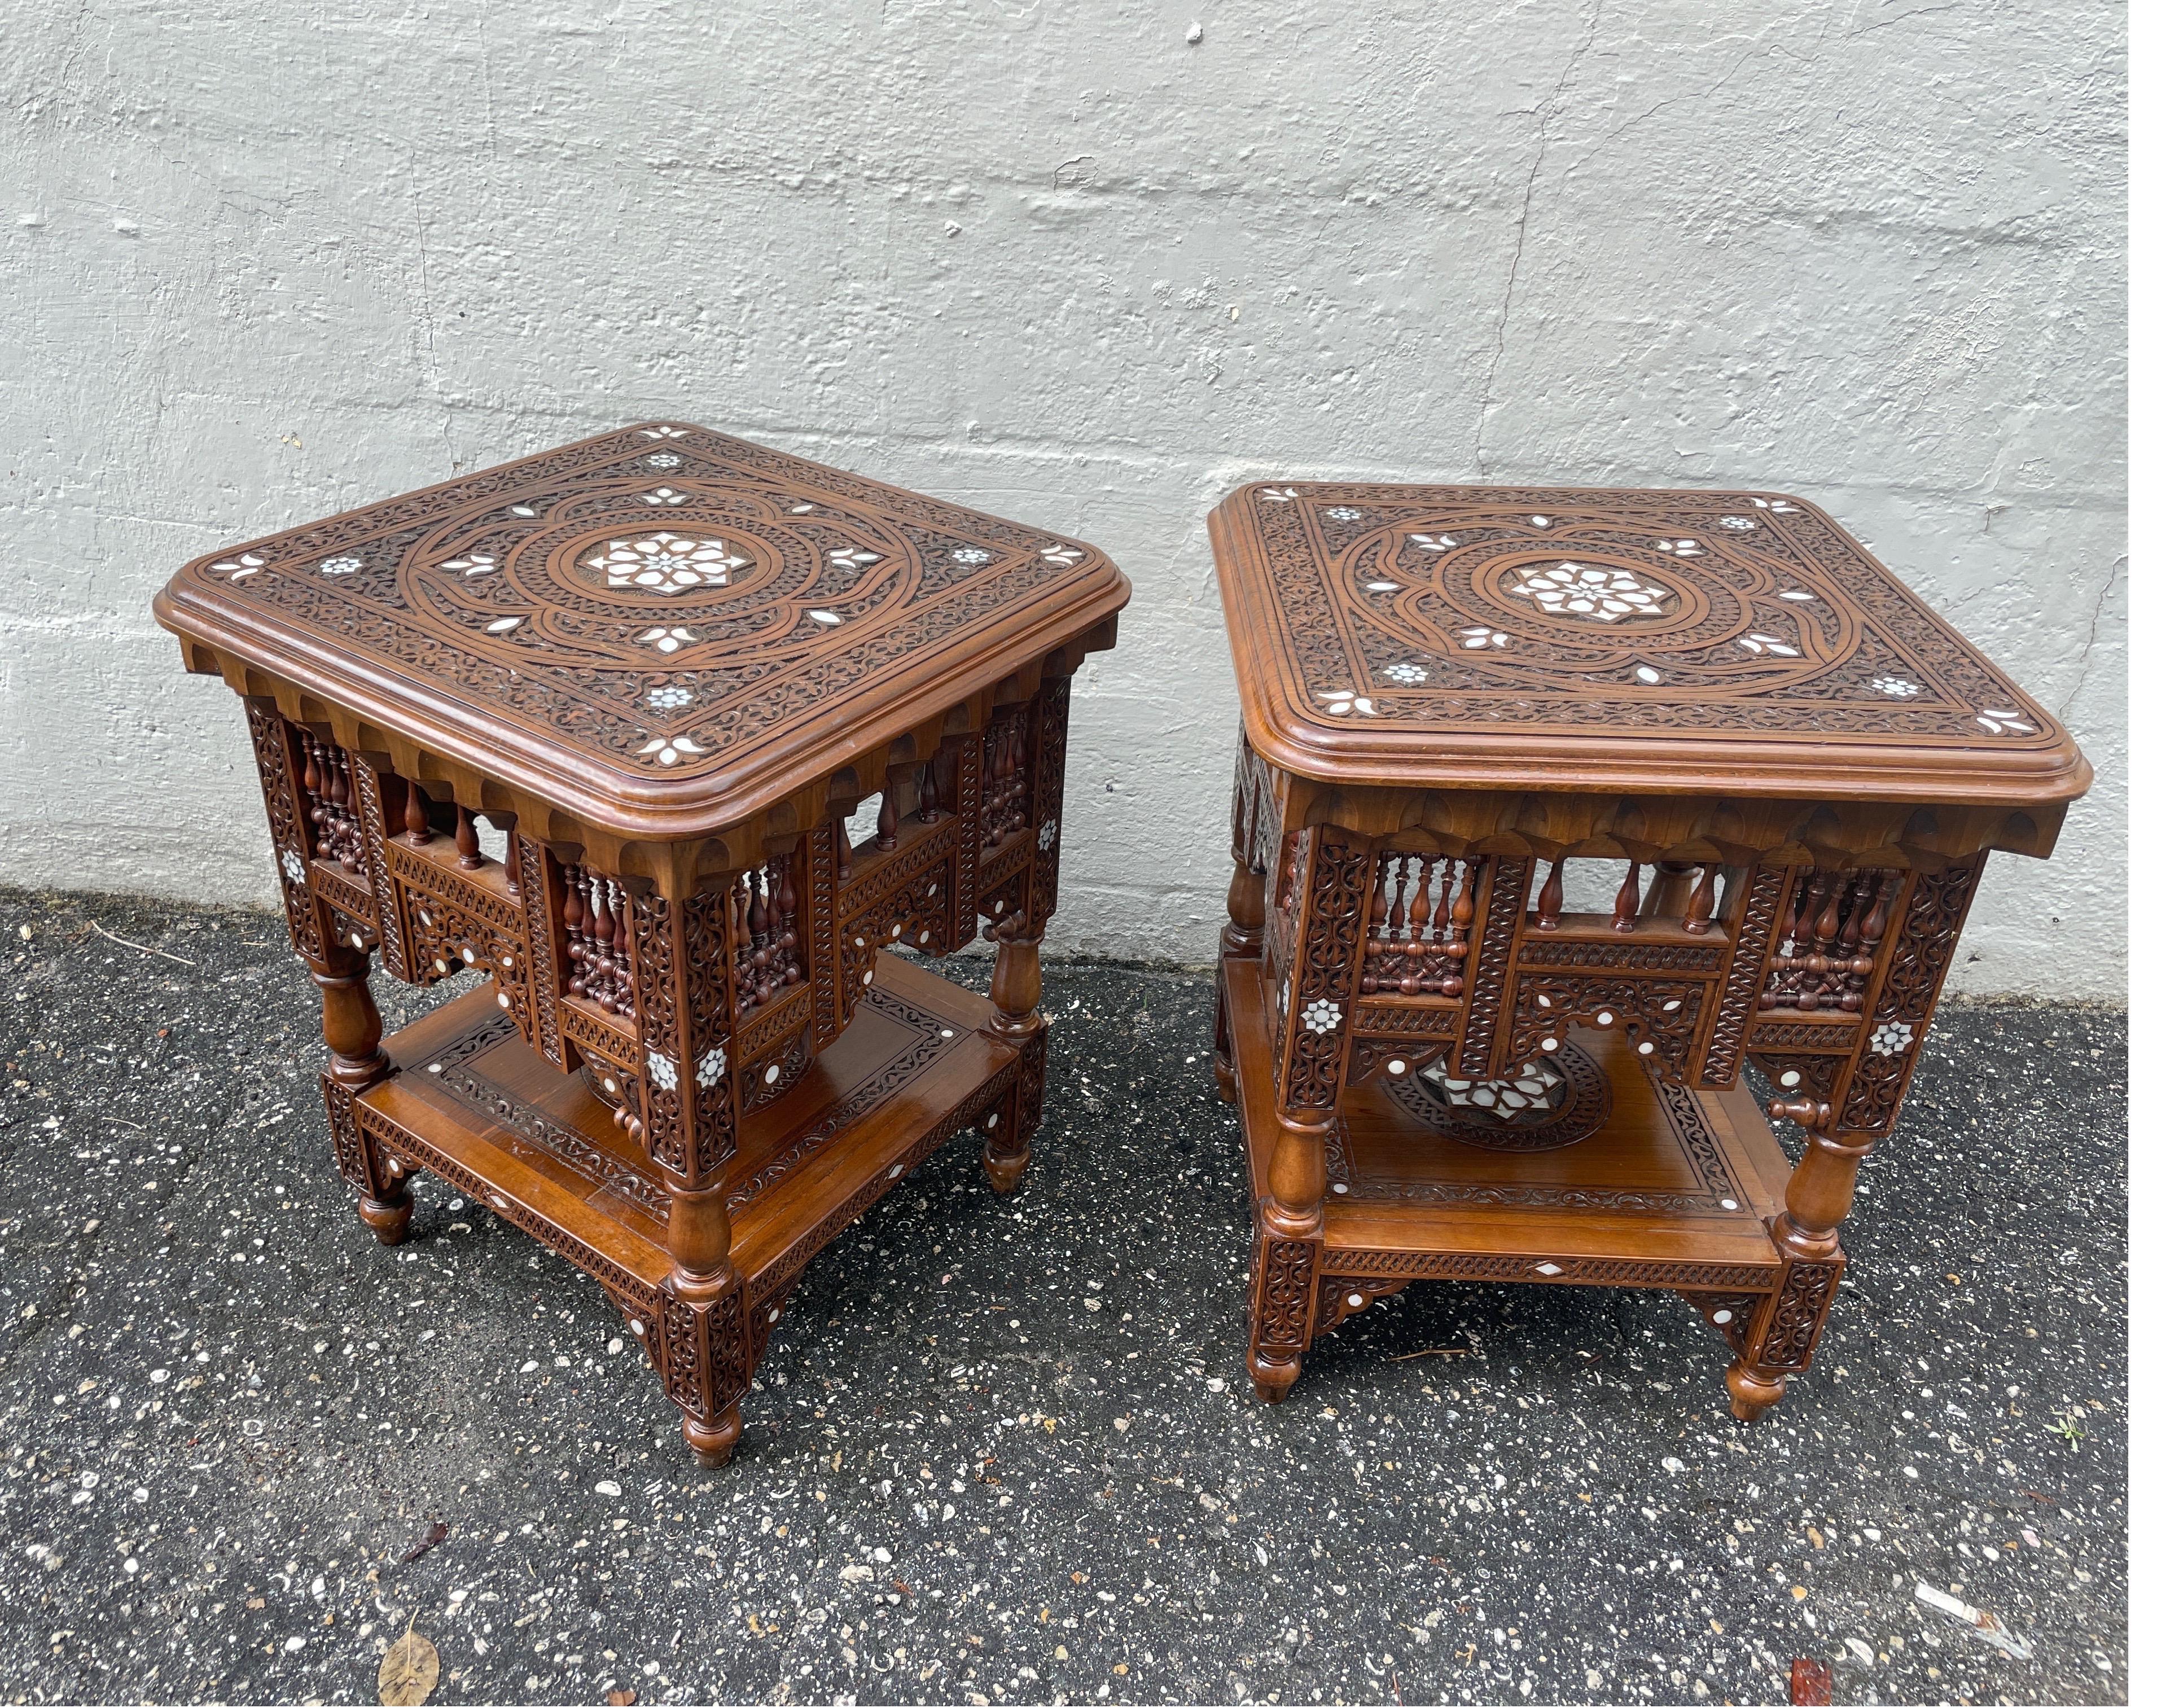 Pair of intricately carved & inlaid mother of pearl side tables. Beautifully detailed on top, bottom & all sides make this pair a real standout in any setting. Very superb quality.